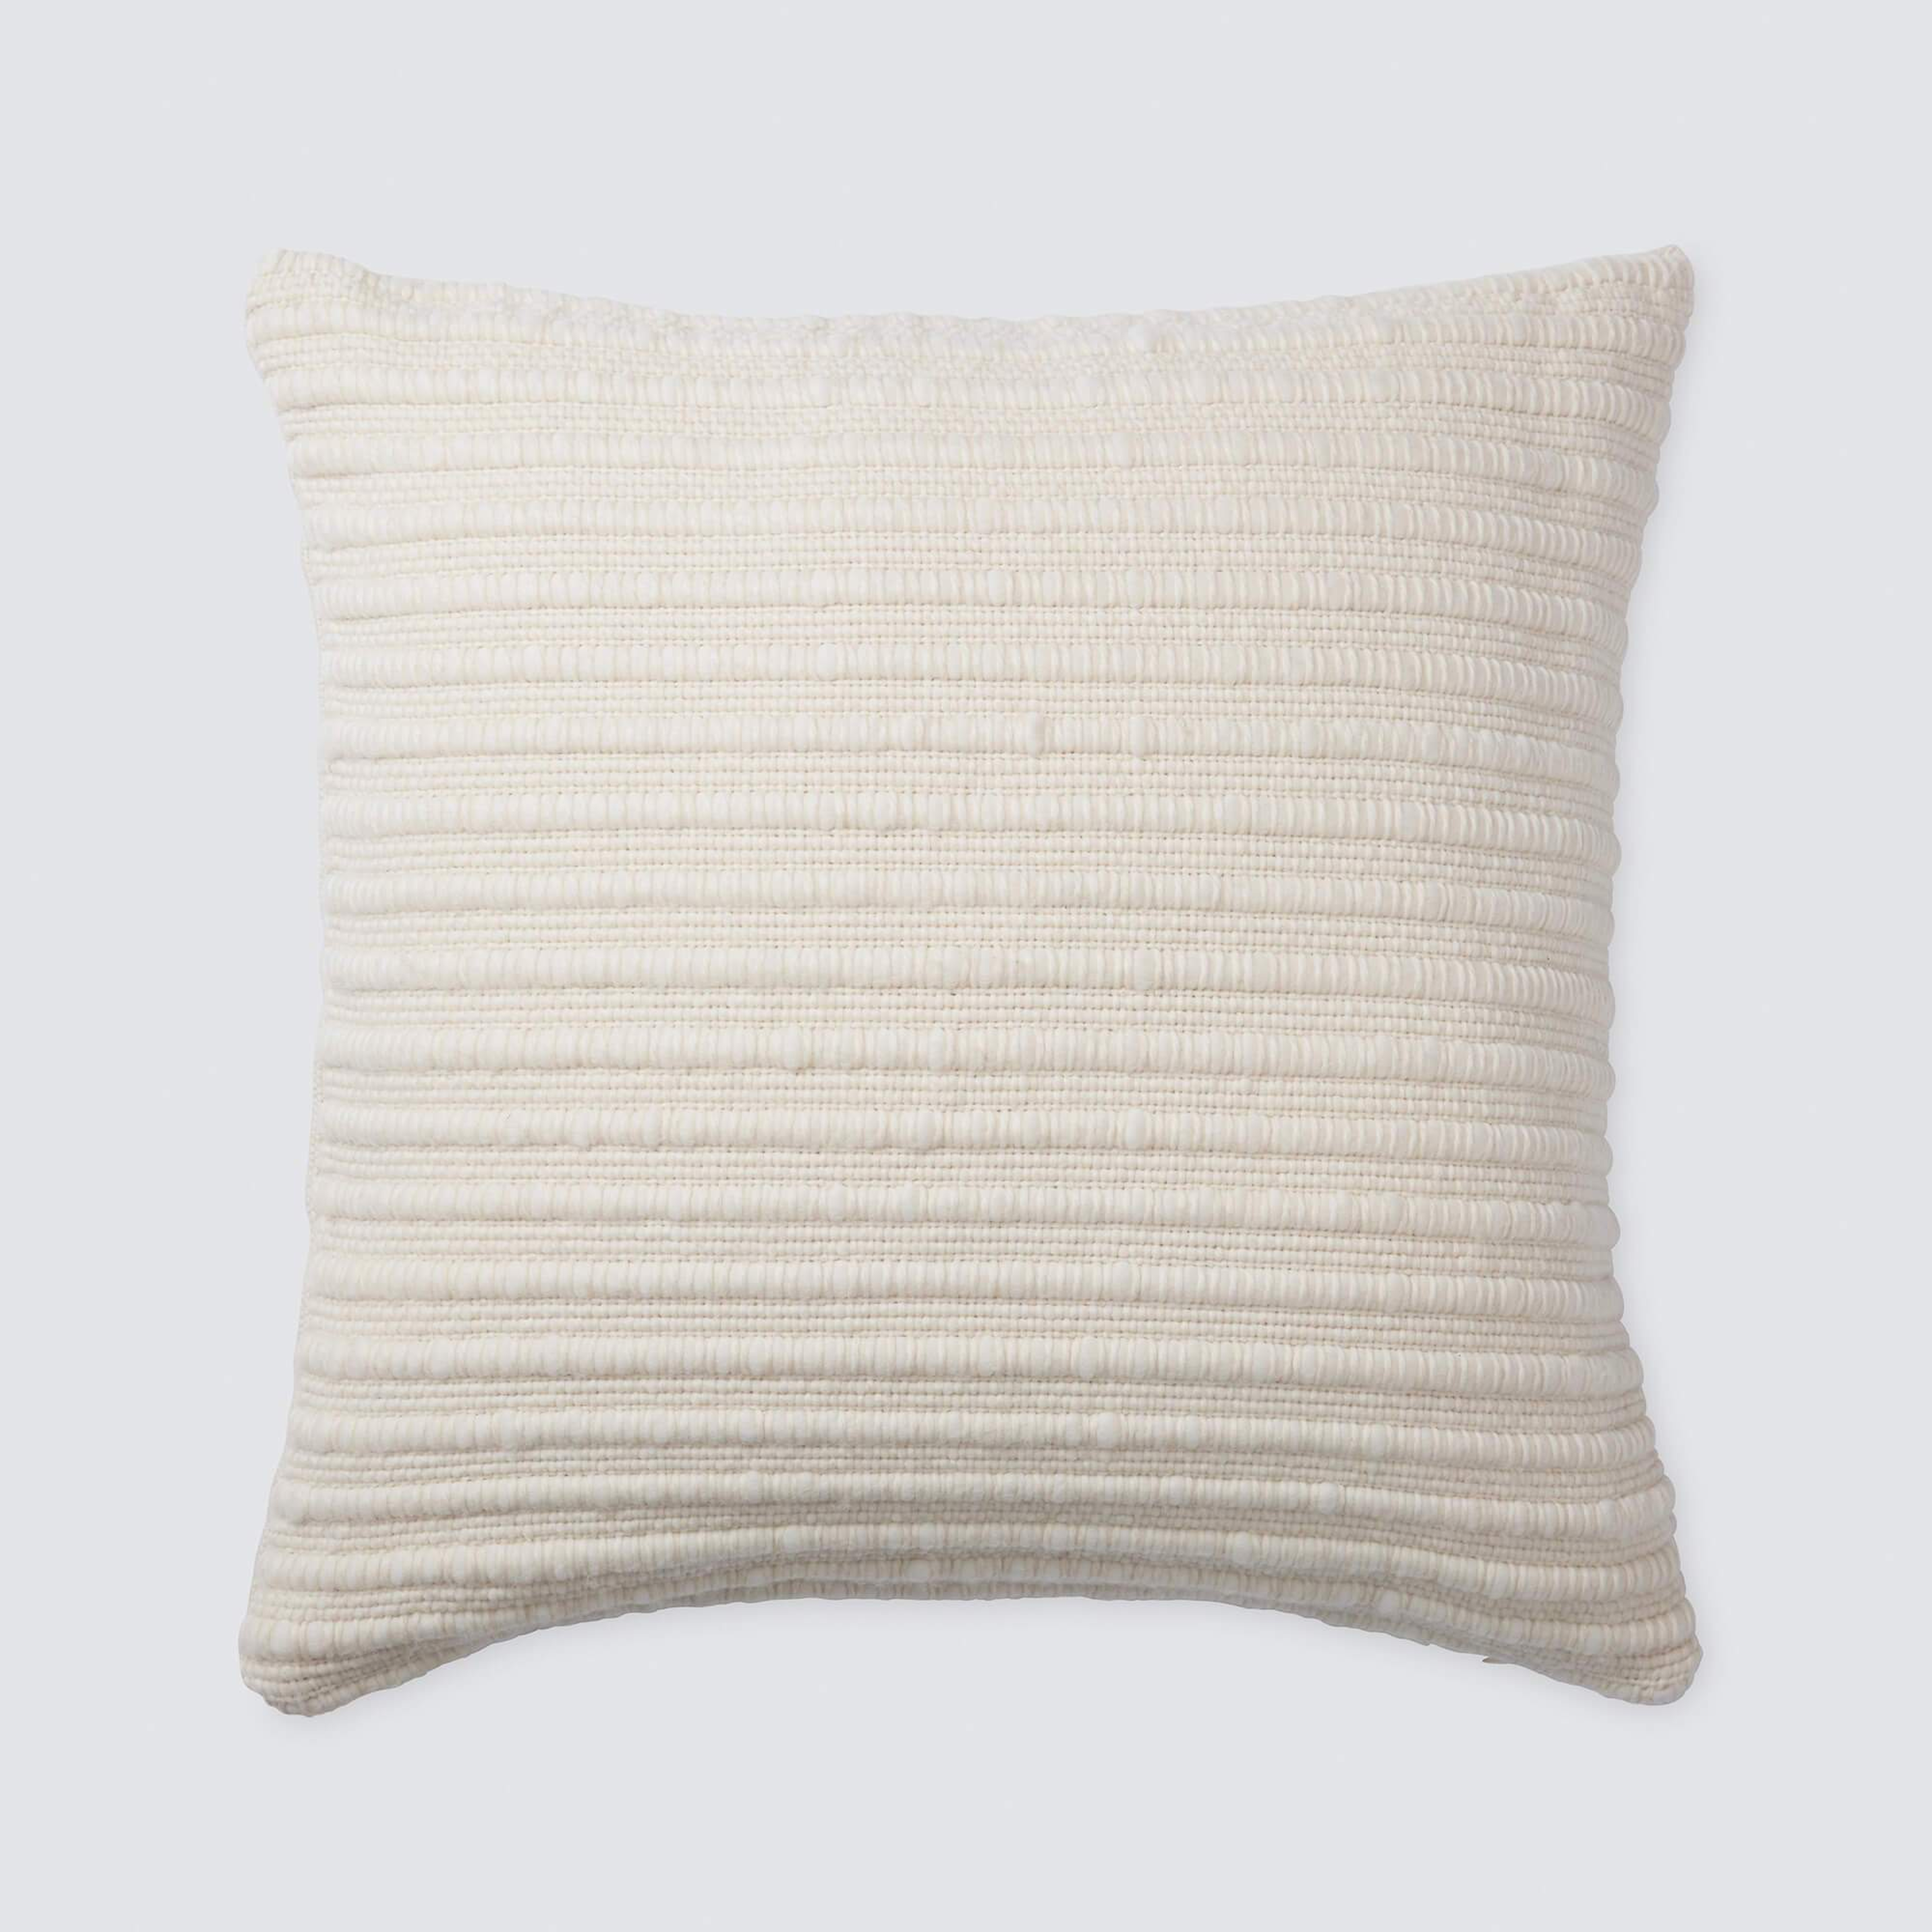 La Duna Pillow - 20 in. x 20 in. By The Citizenry - The Citizenry